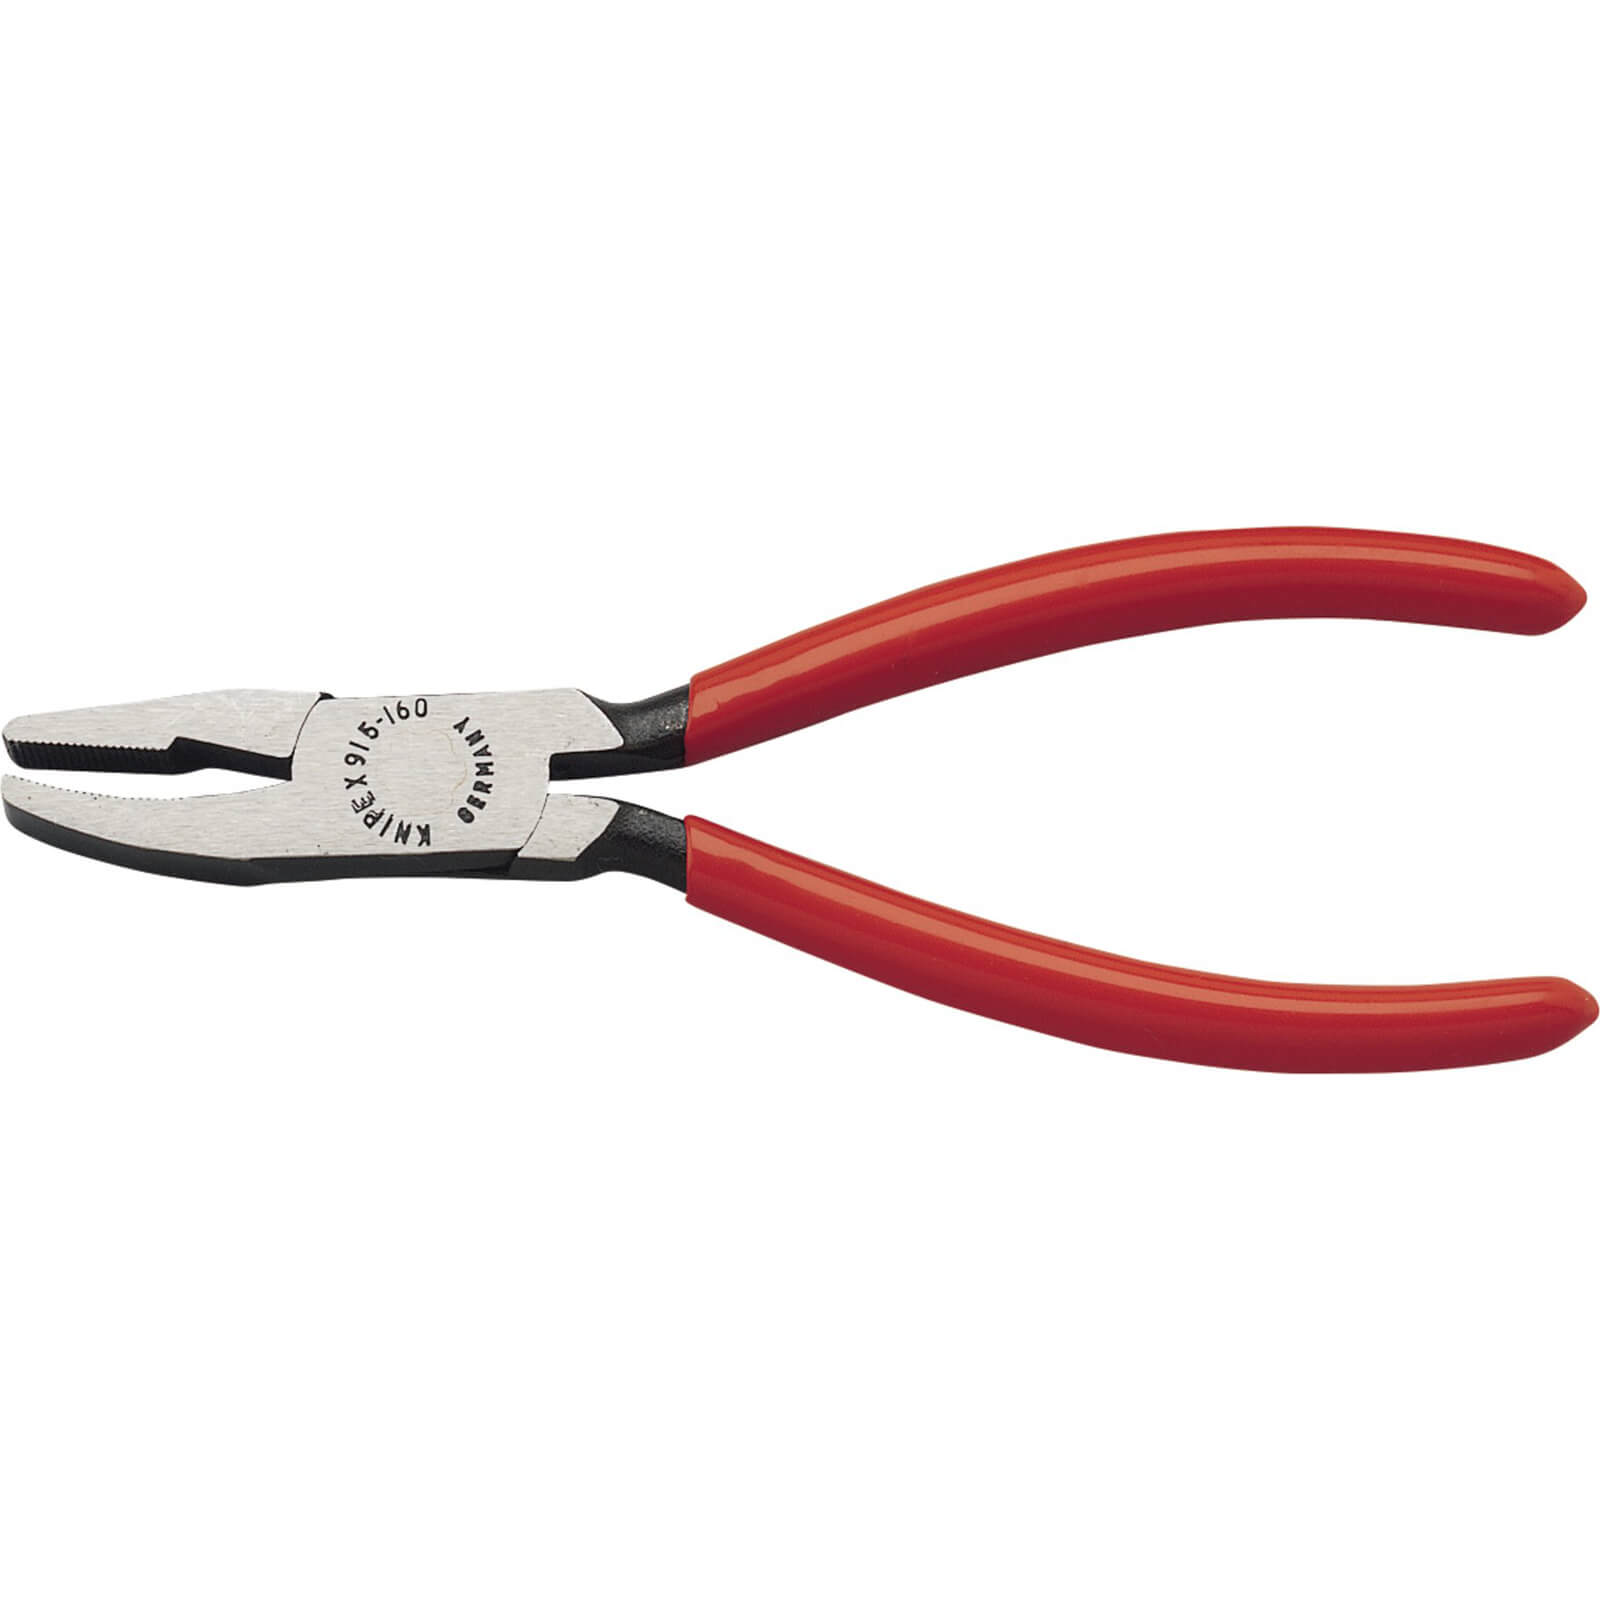 Knipex Glass Nibbling Pincers 160mm